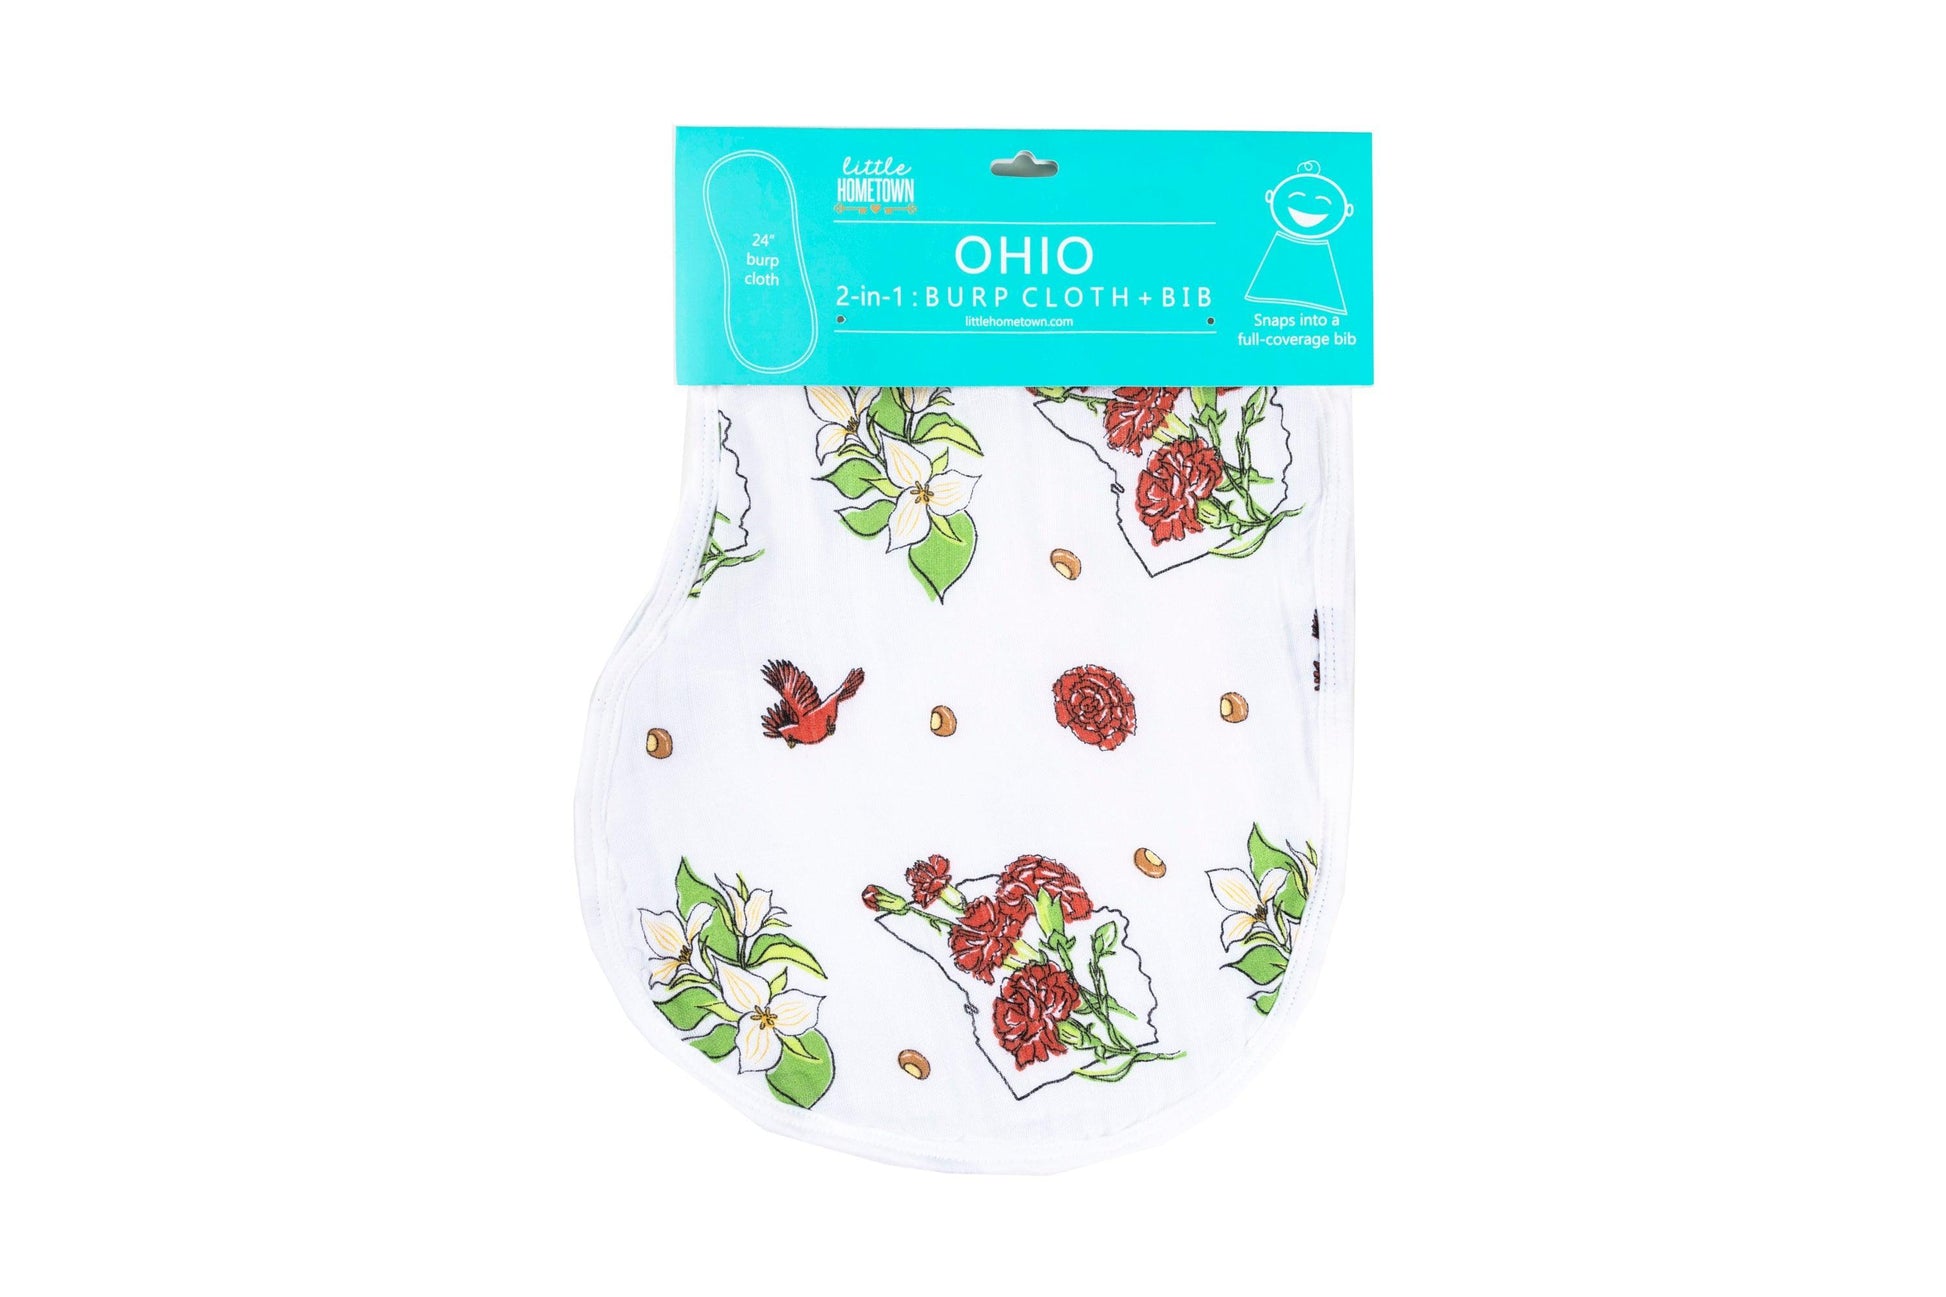 Baby bib and burp cloth set with Ohio floral design, featuring pink and blue flowers on a white background.